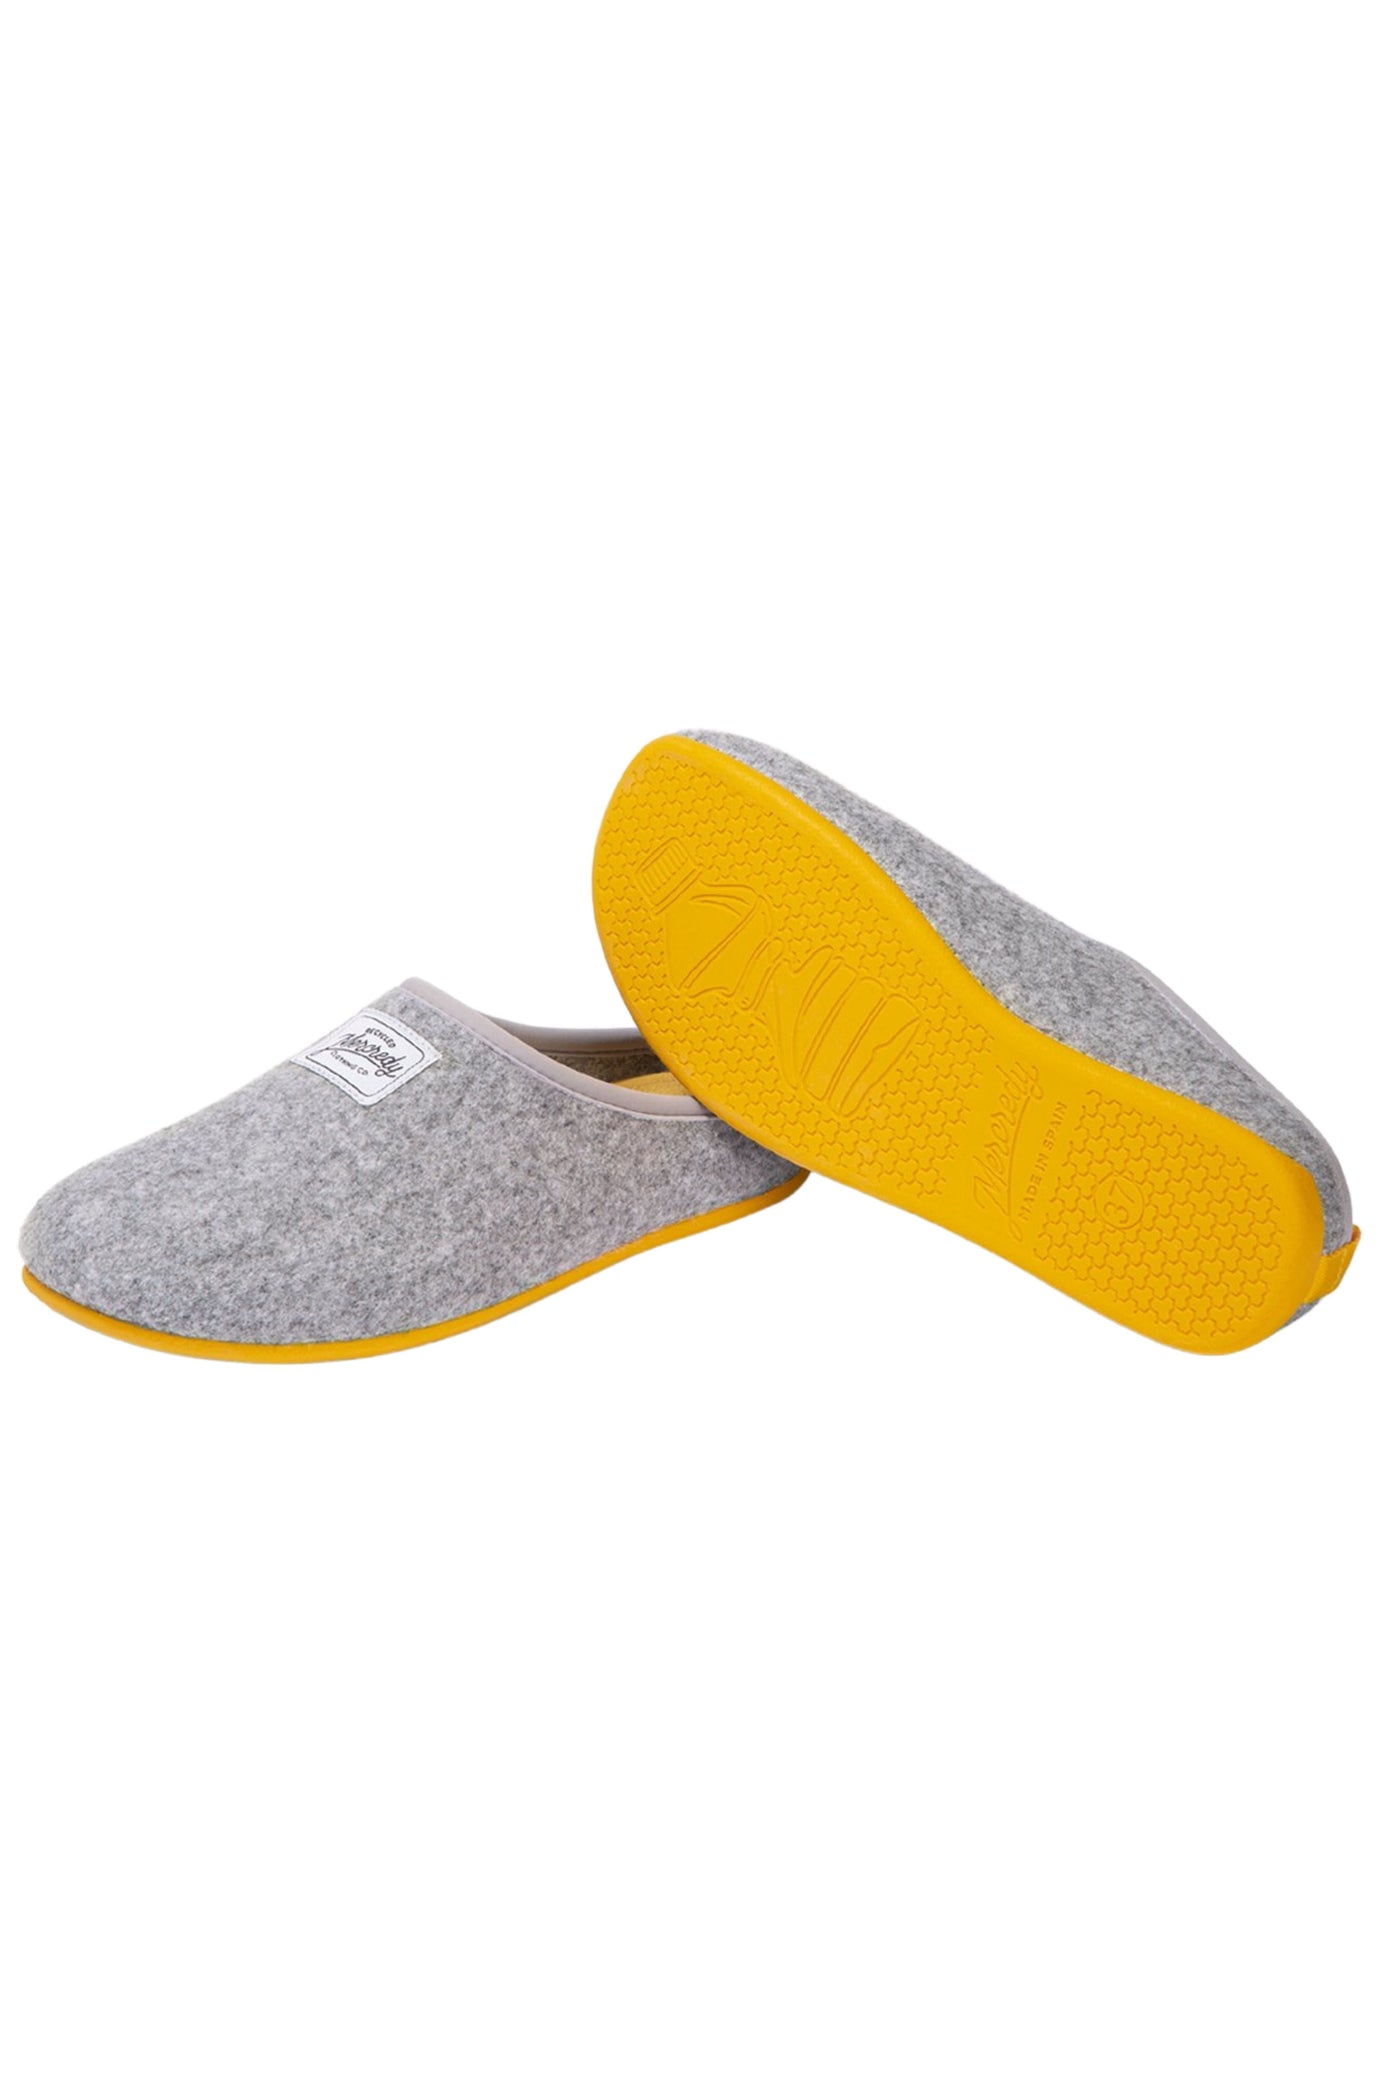 Mercredy Grey and Yellow Slippers-Womens-Ohh! By Gum - Shop Sustainable